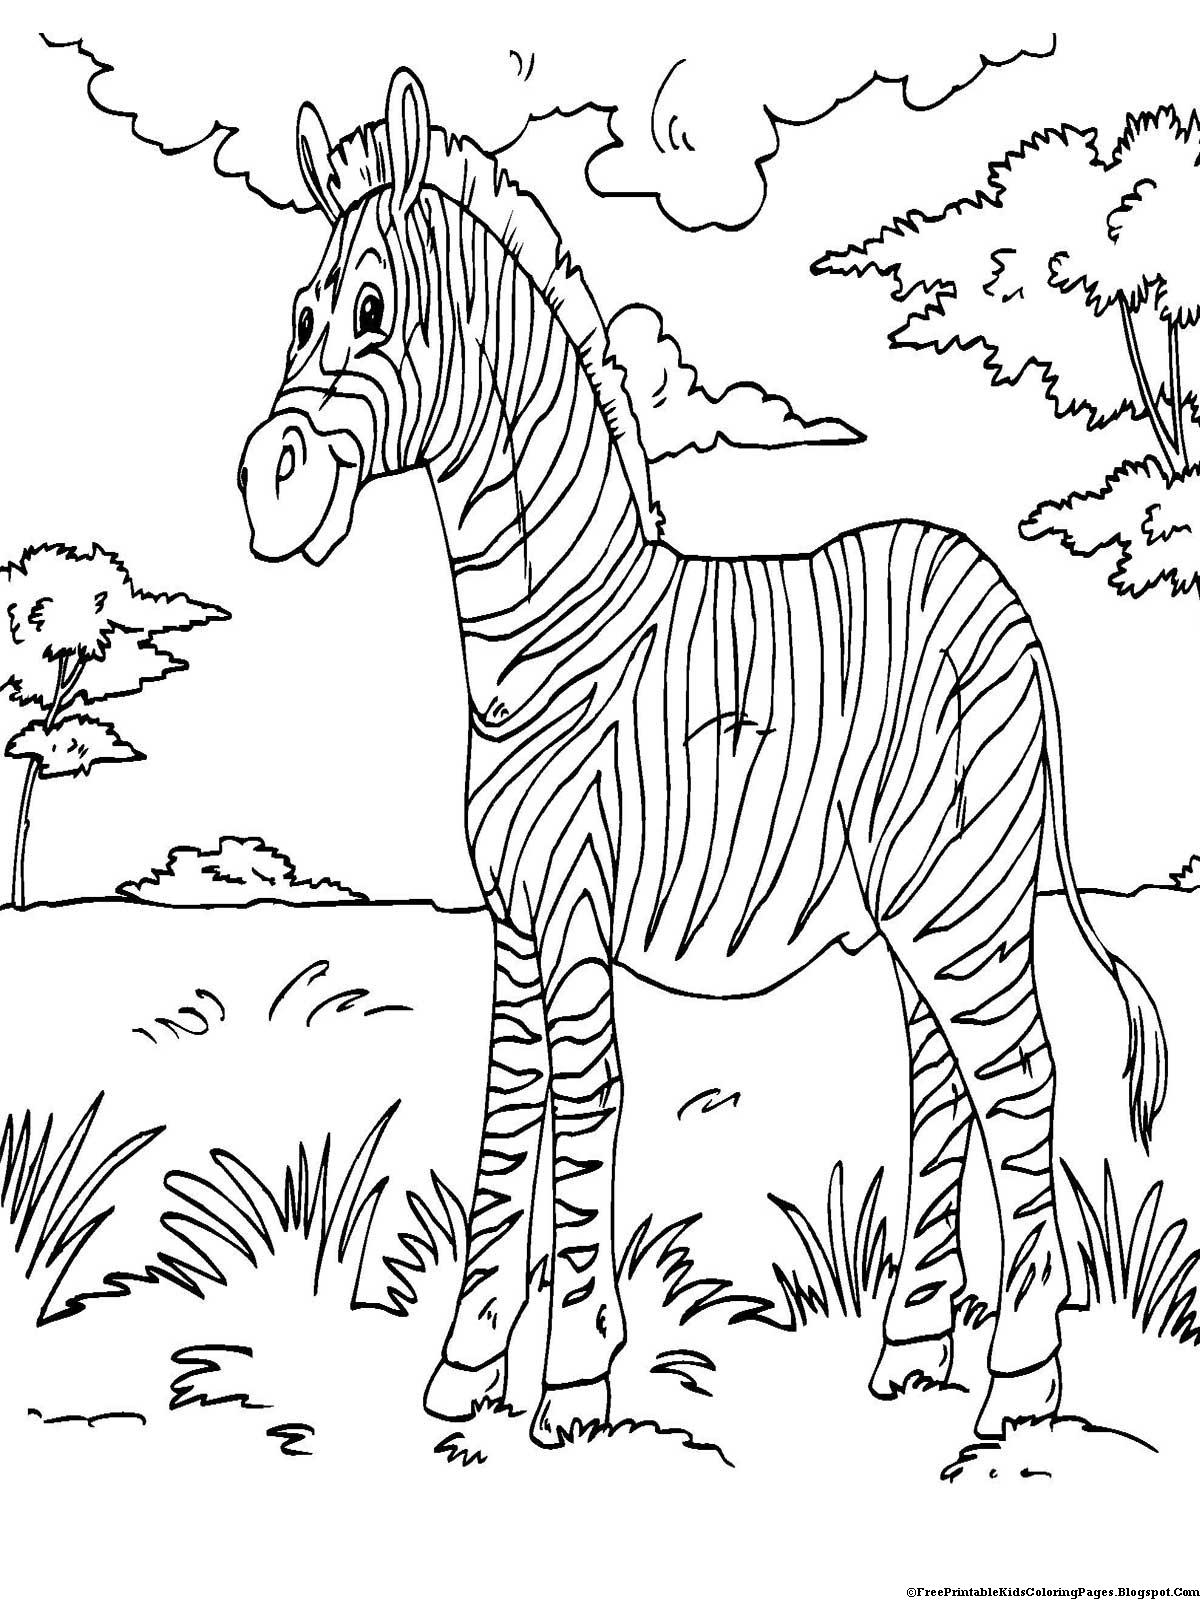 Zebra Coloring Pages - Free Printable Kids Coloring Pages